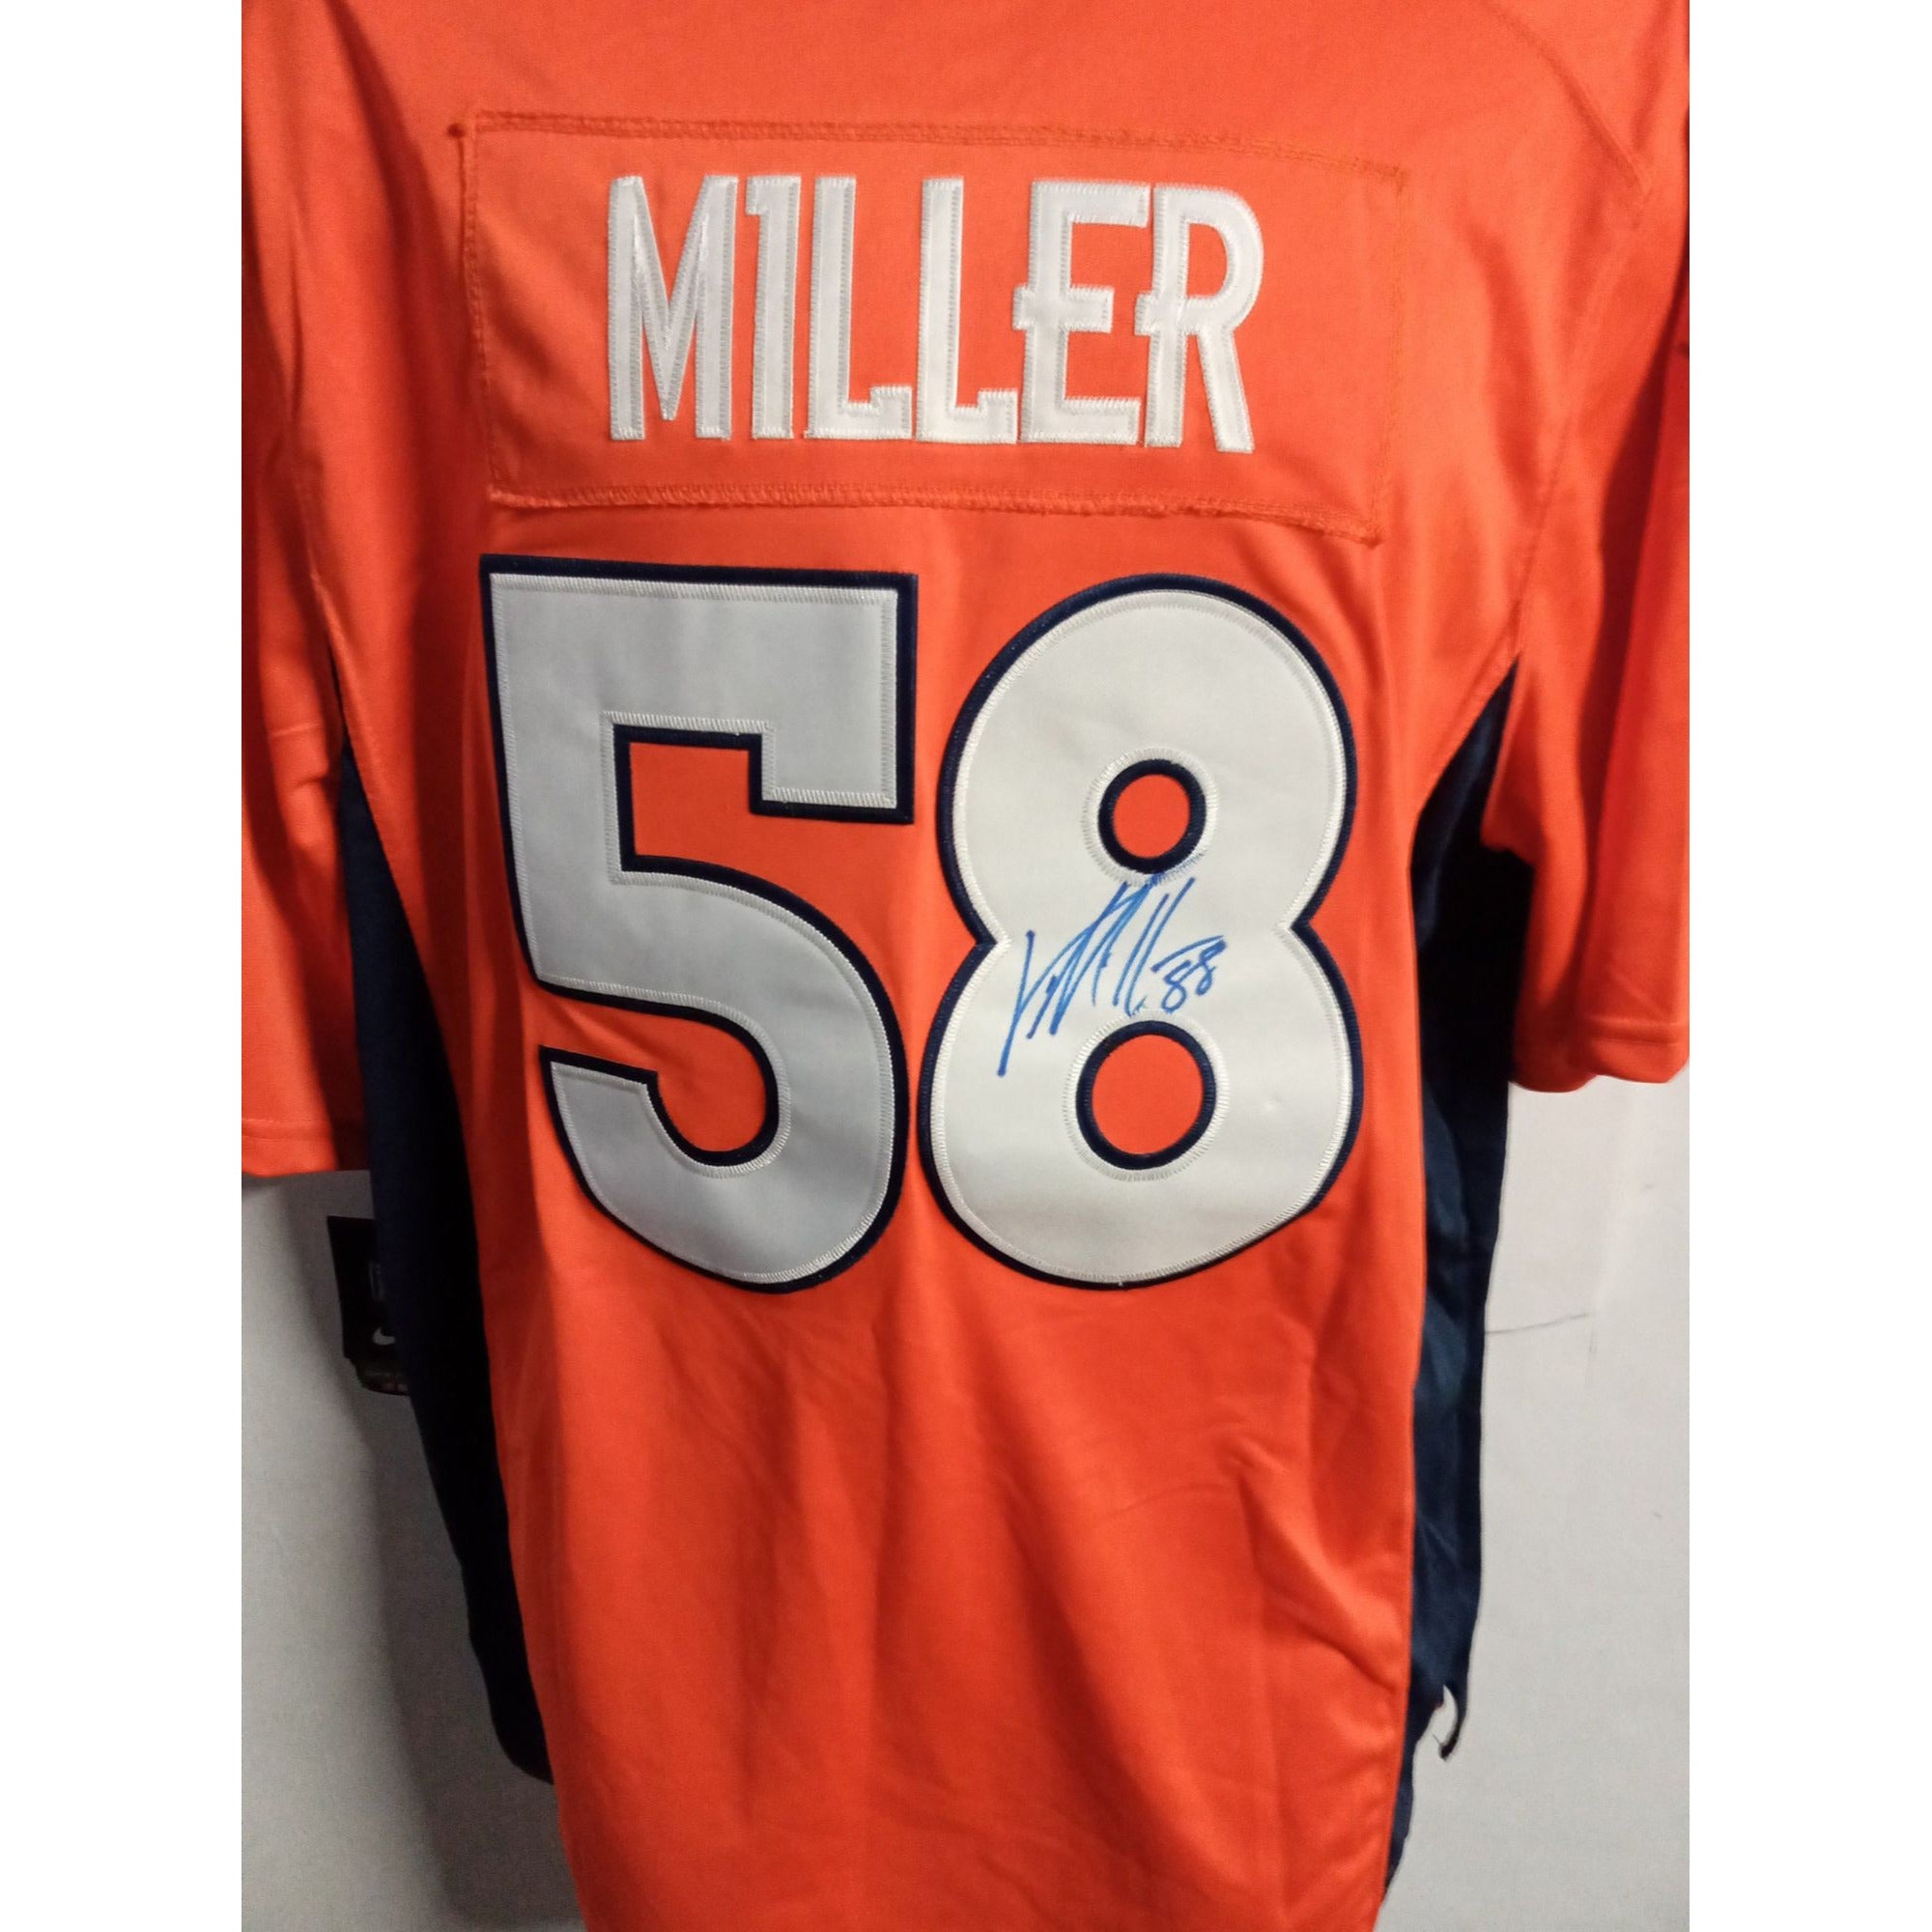 Awesome Artifacts Von Miller Denver Broncos Super Bowl MVP Signed Jersey by Awesome Artifact